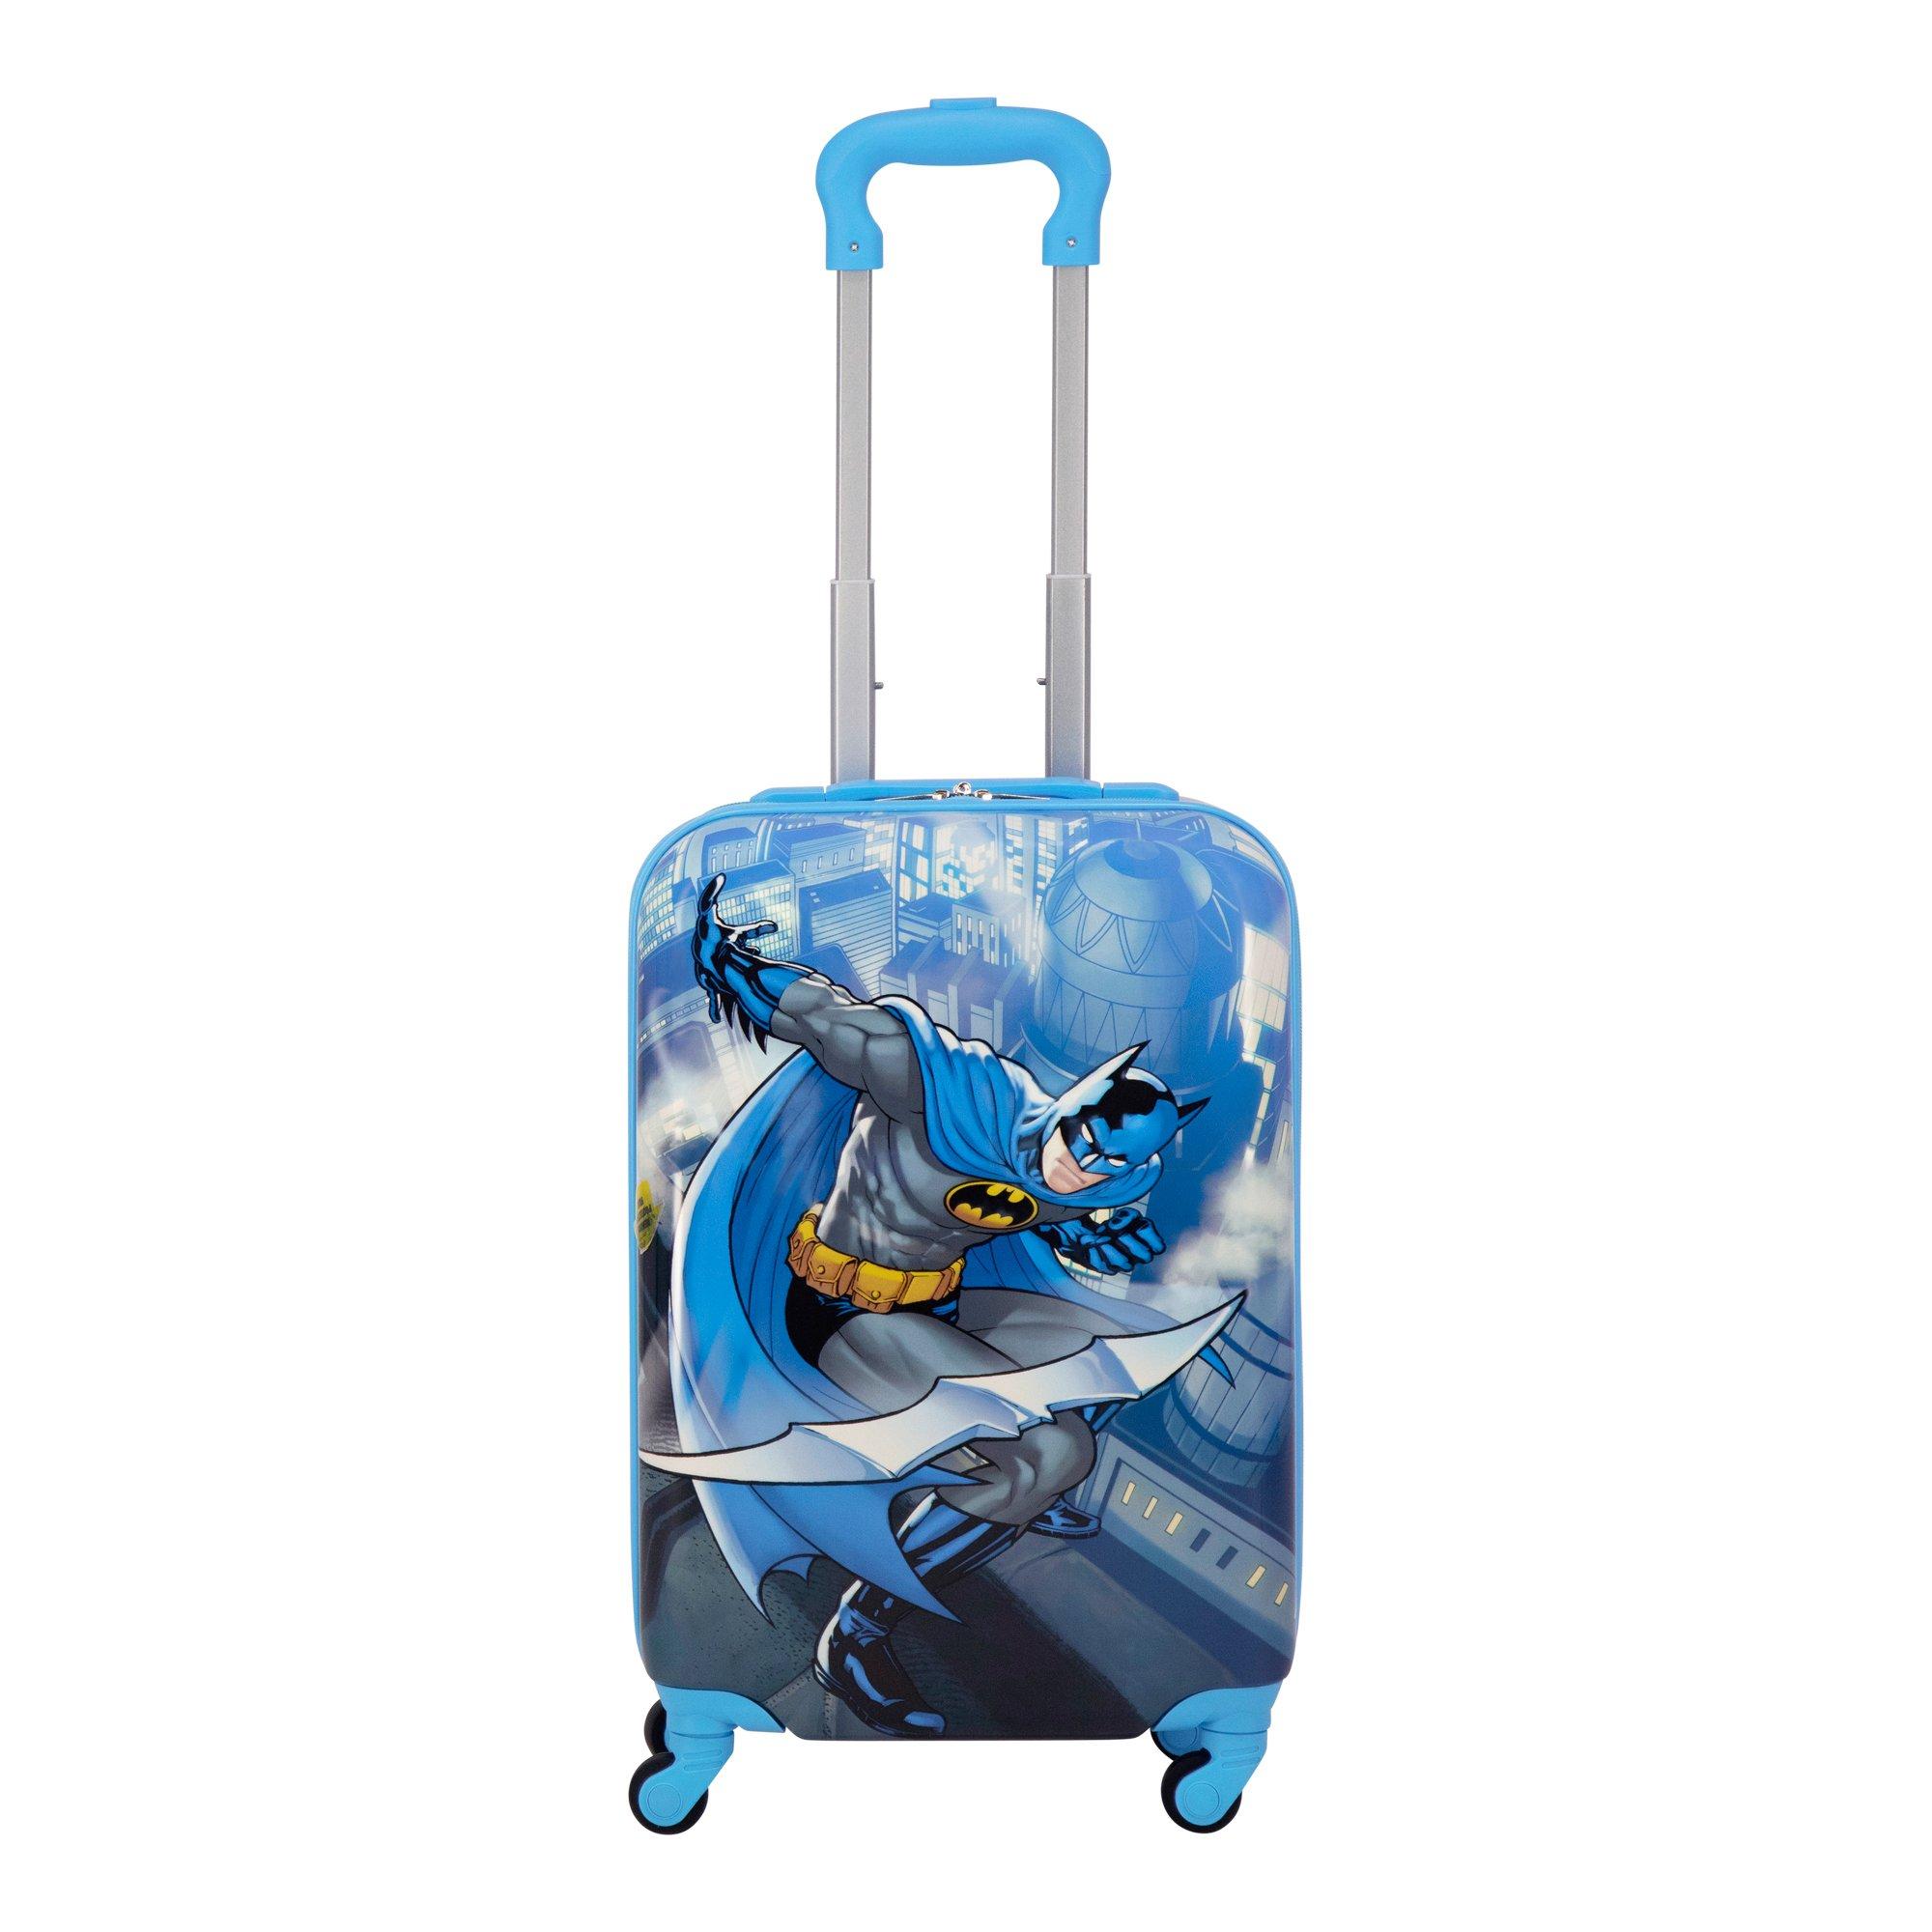 FUL DC Comics FBatman Rooftop Kids 21-in Hard-Sided Carry-On Luggage